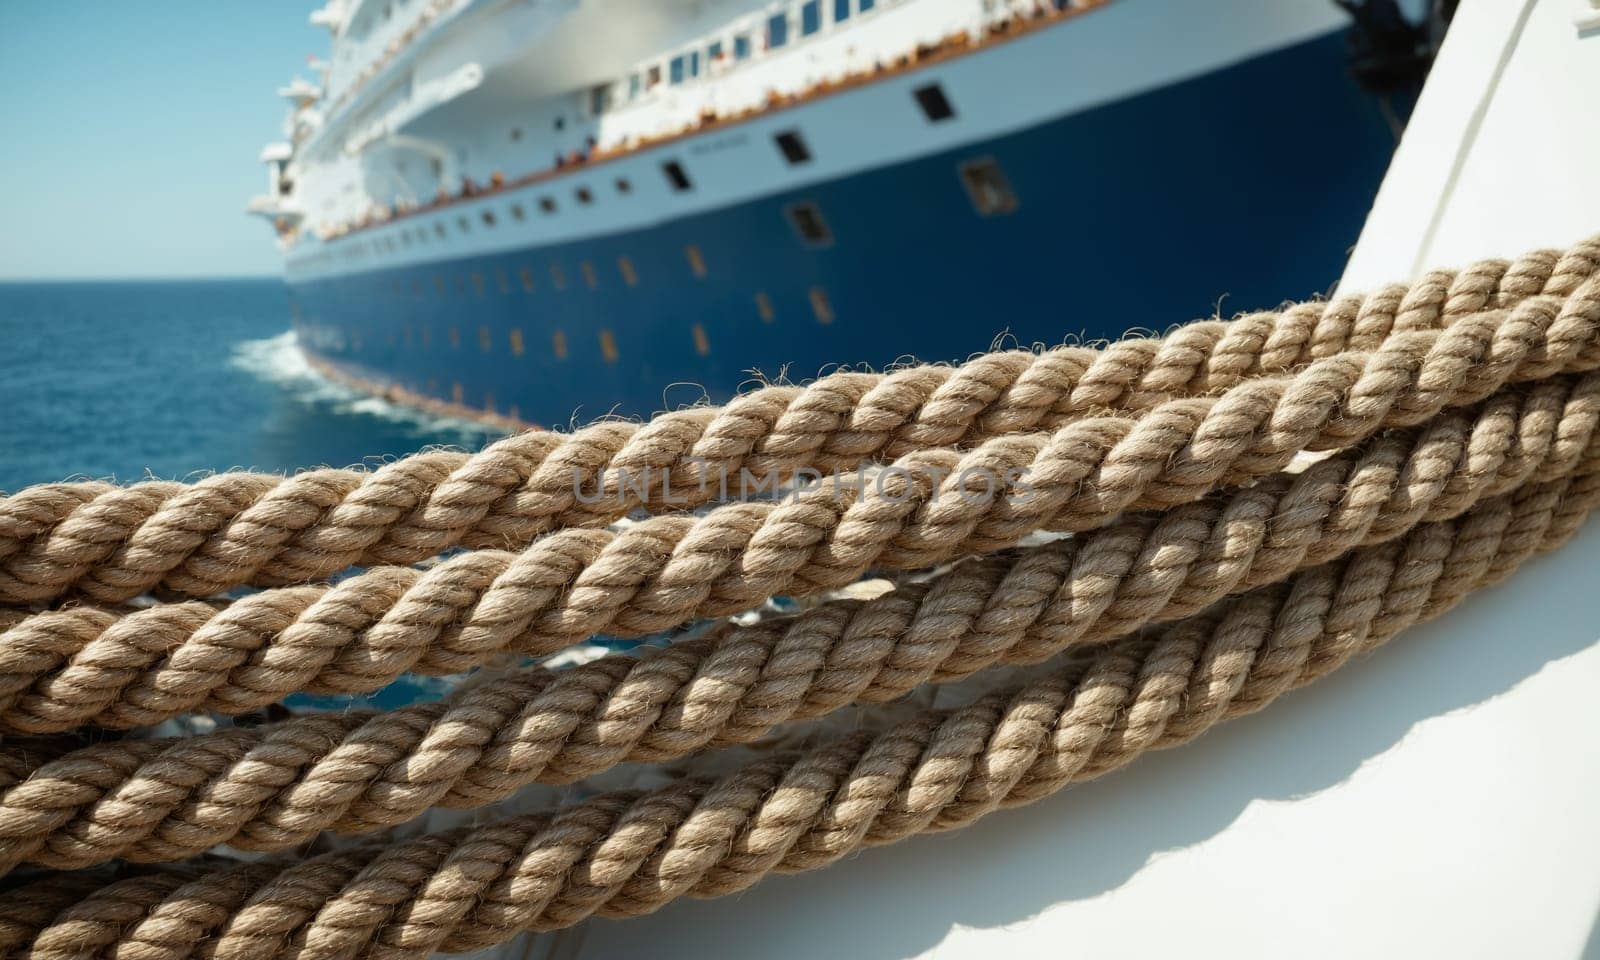 Rope from the side of the ship.